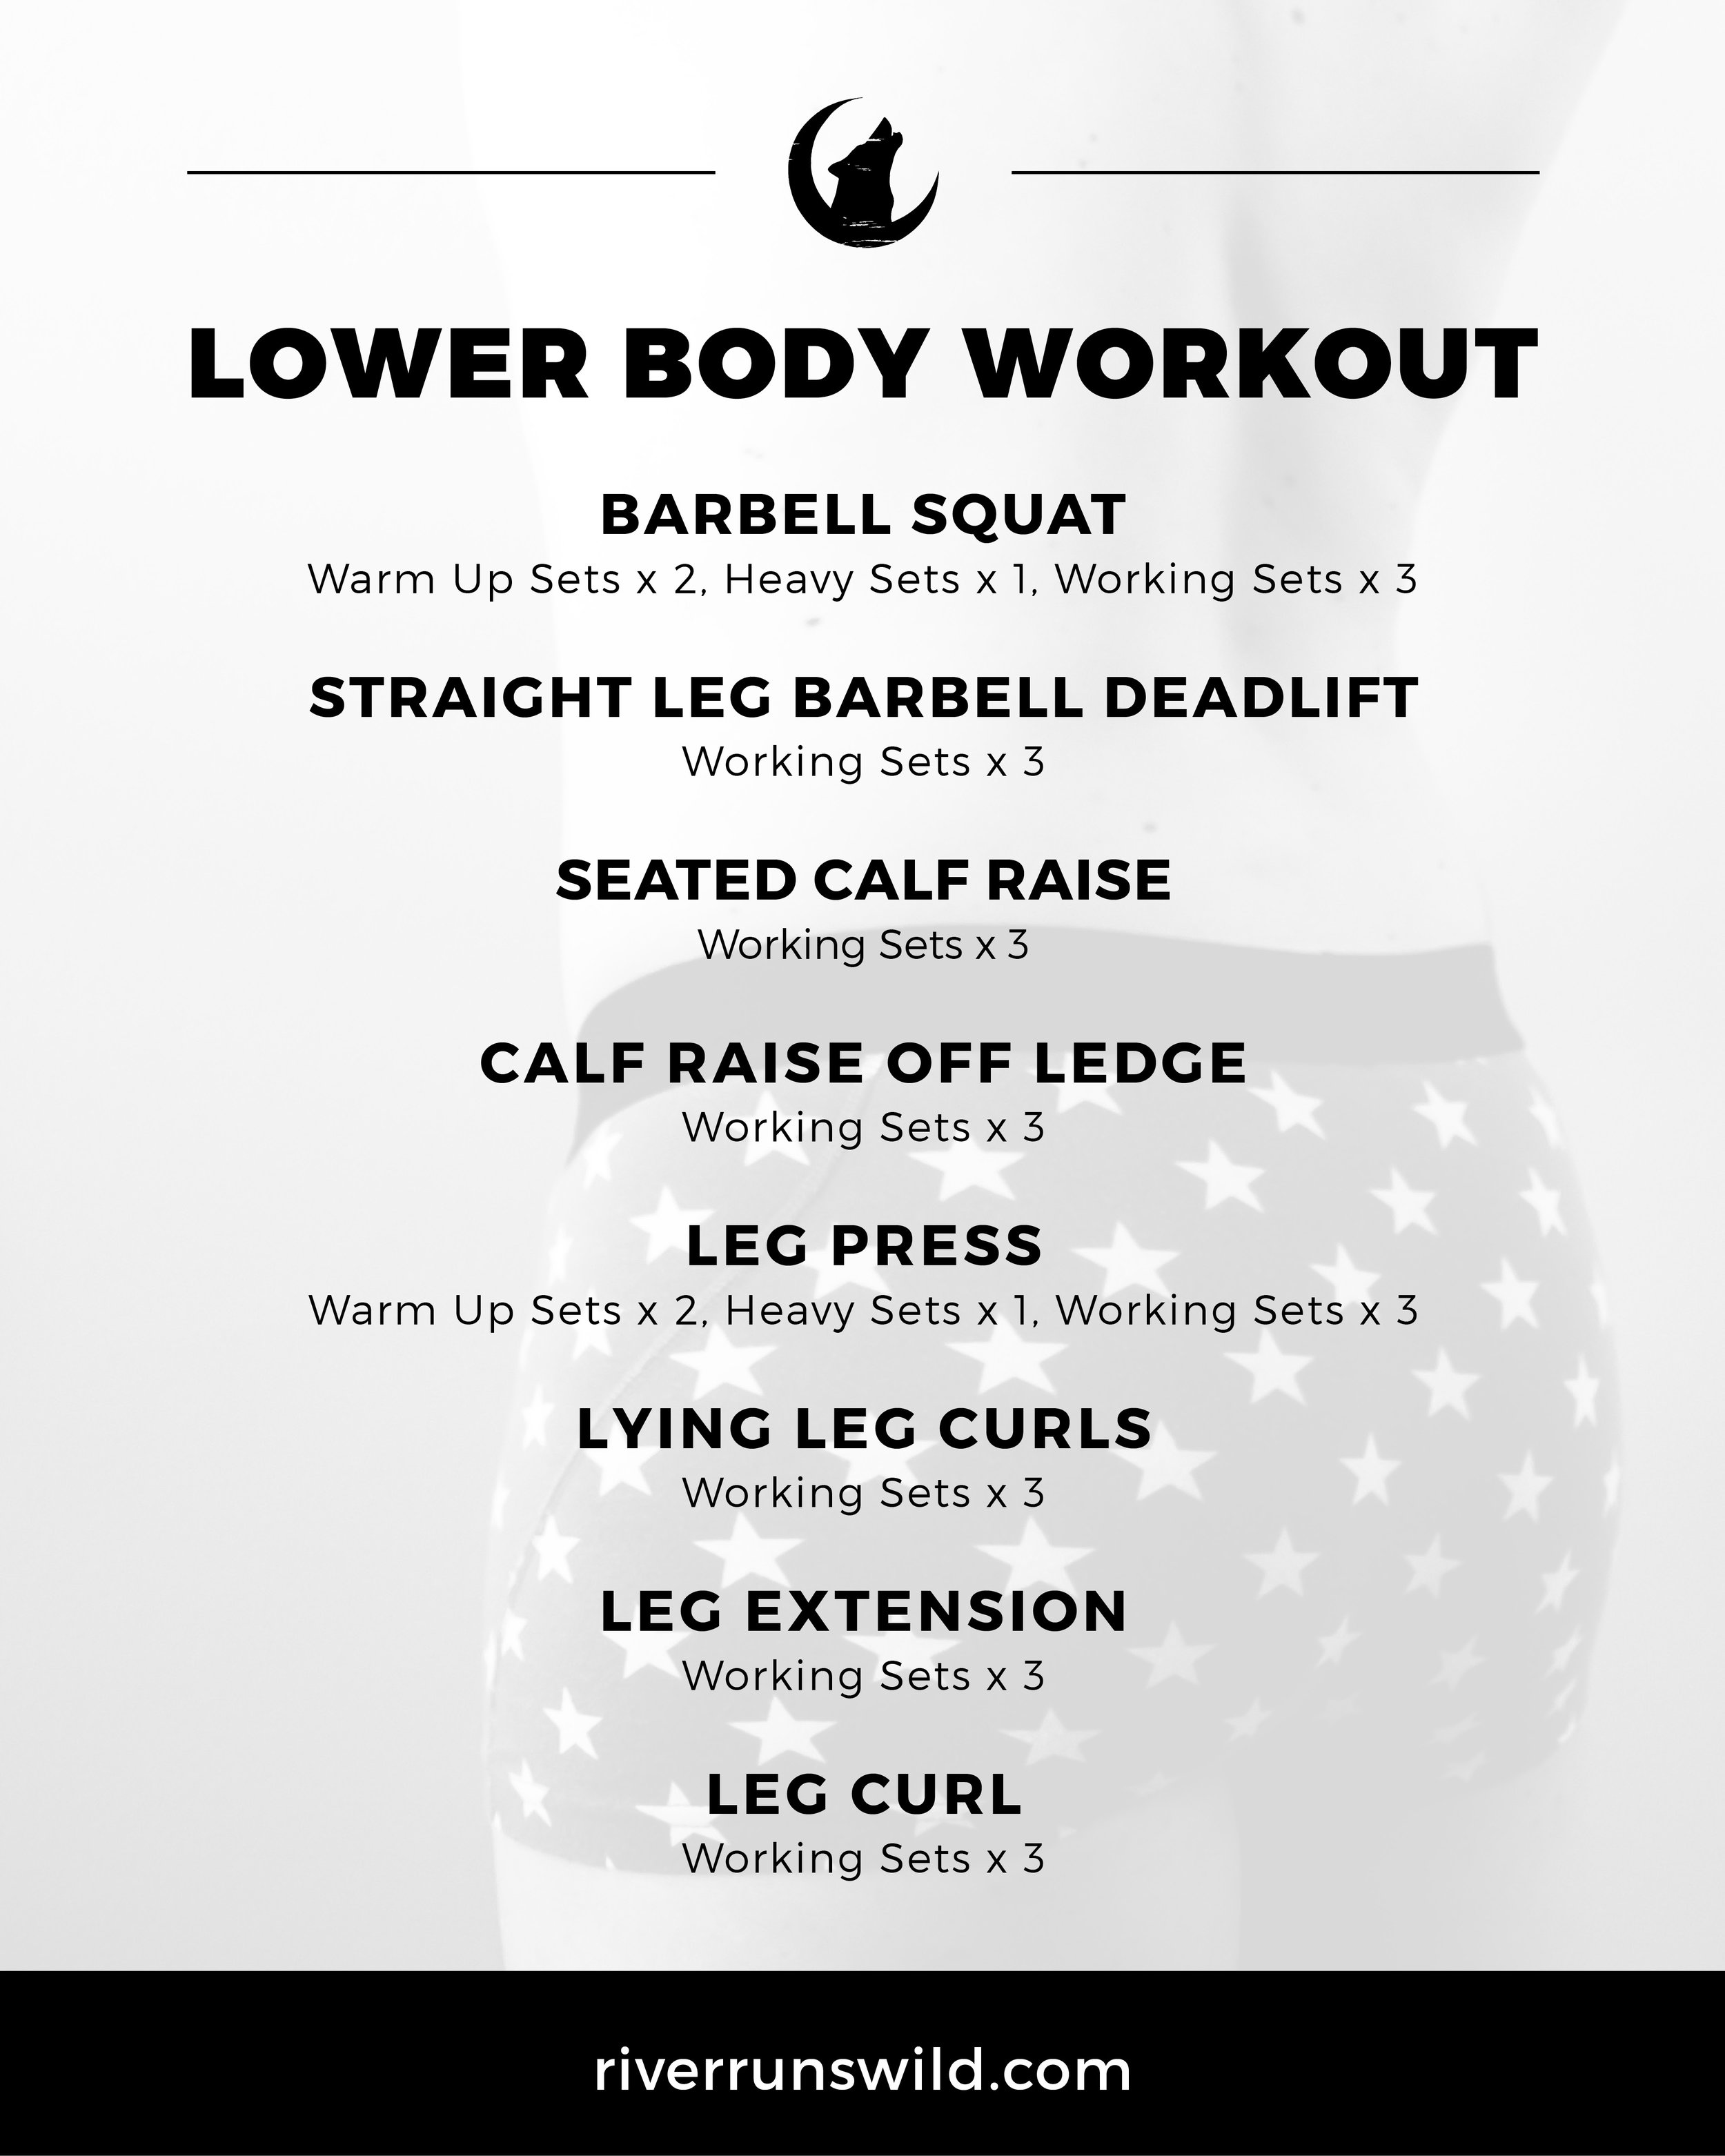 Lower Body Workout to Get Bigger - FTM Fitness — River Runs Wild - FTM  Fitness, Transition, Nutrition, Wellness